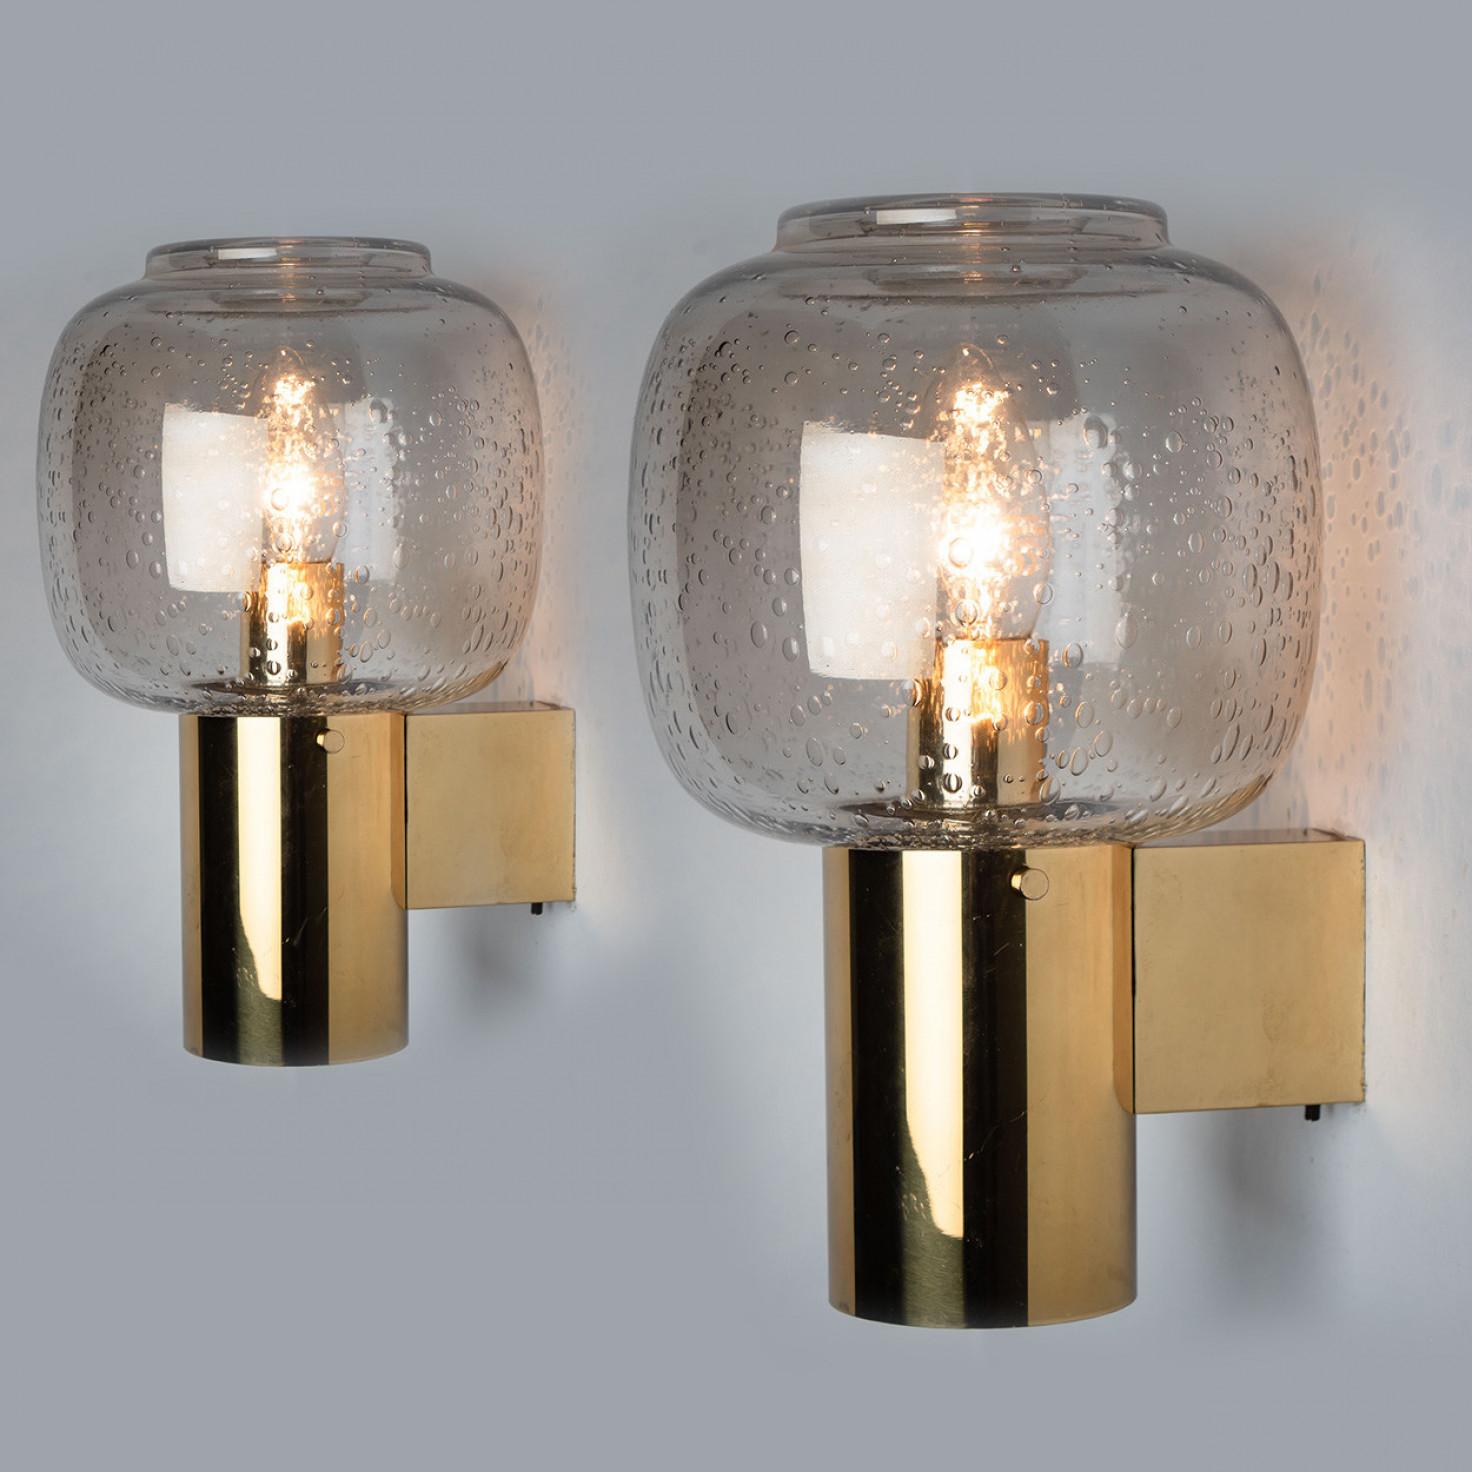 These stunning brass wall lights with clear bubbled glass are produced in the 1960s in the style of Hans-Agne Jakobsson. Design executed with a taste for excellence in craftsmanship.

Good cleaned respecting the beautiful patina, well-wired, in full